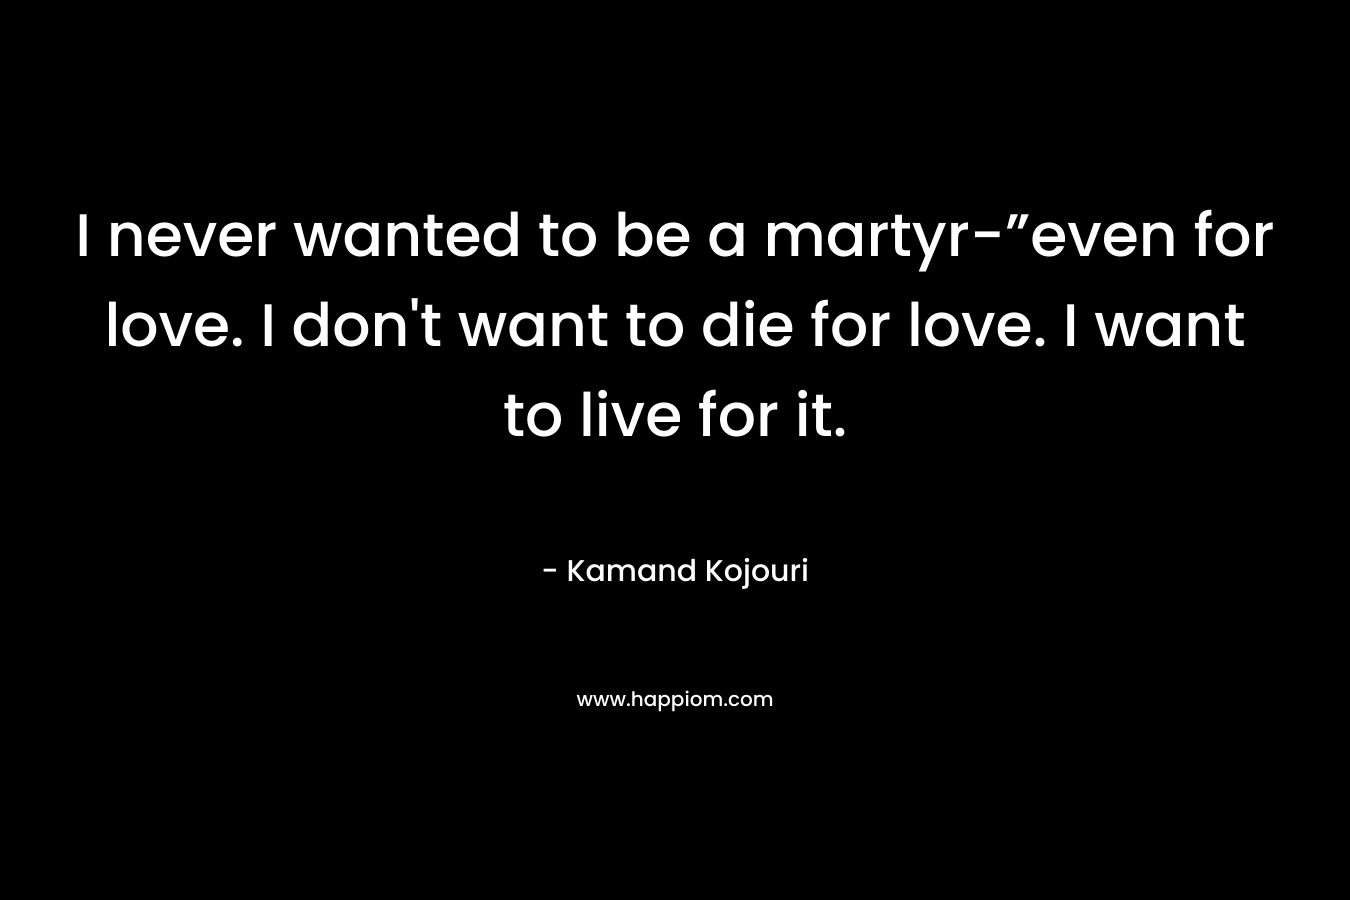 I never wanted to be a martyr-”even for love. I don’t want to die for love. I want to live for it. – Kamand Kojouri